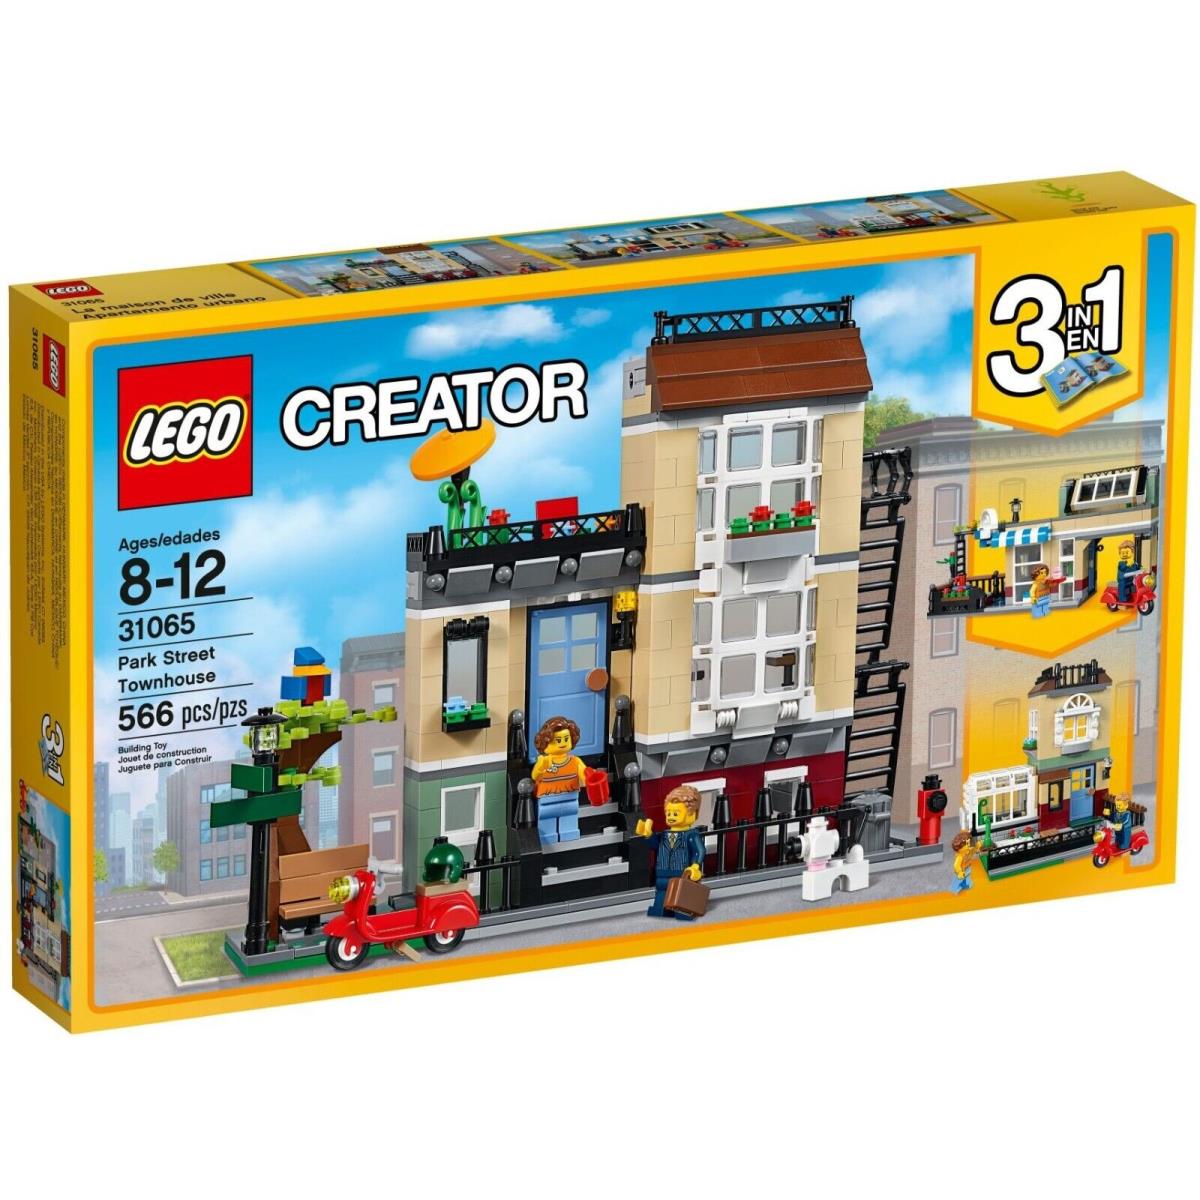 Lego Creator 31065 Park Street Townhouse Retired Building Set - Red